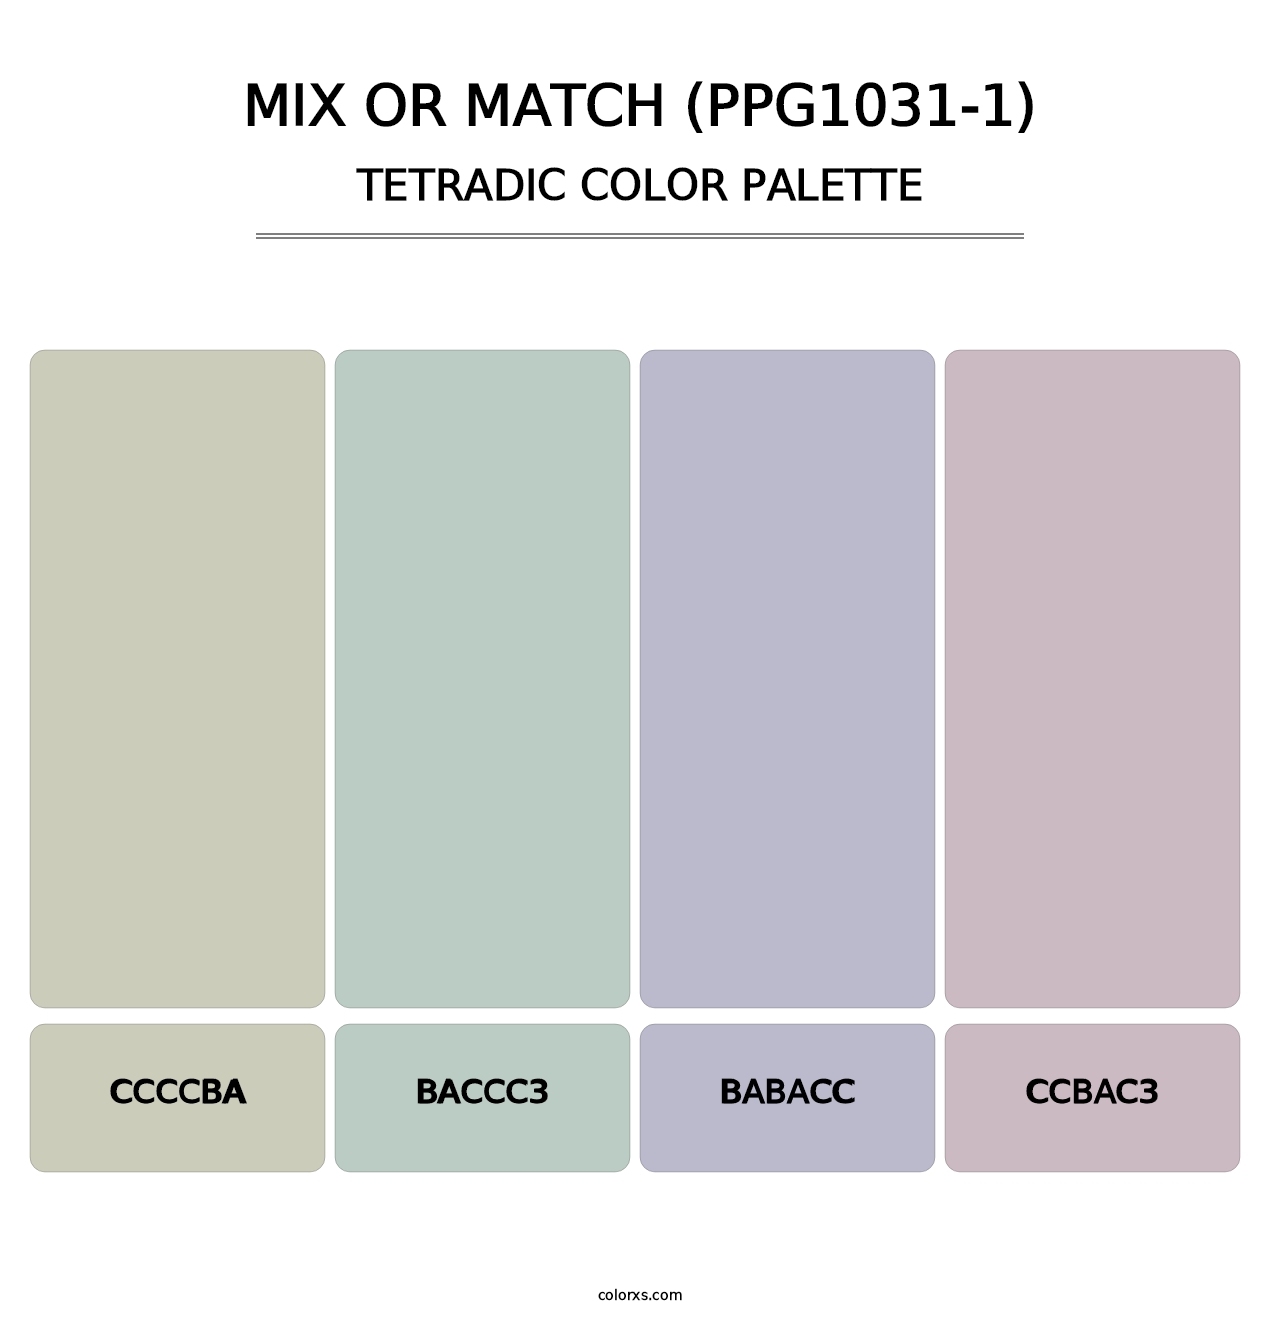 Mix Or Match (PPG1031-1) - Tetradic Color Palette